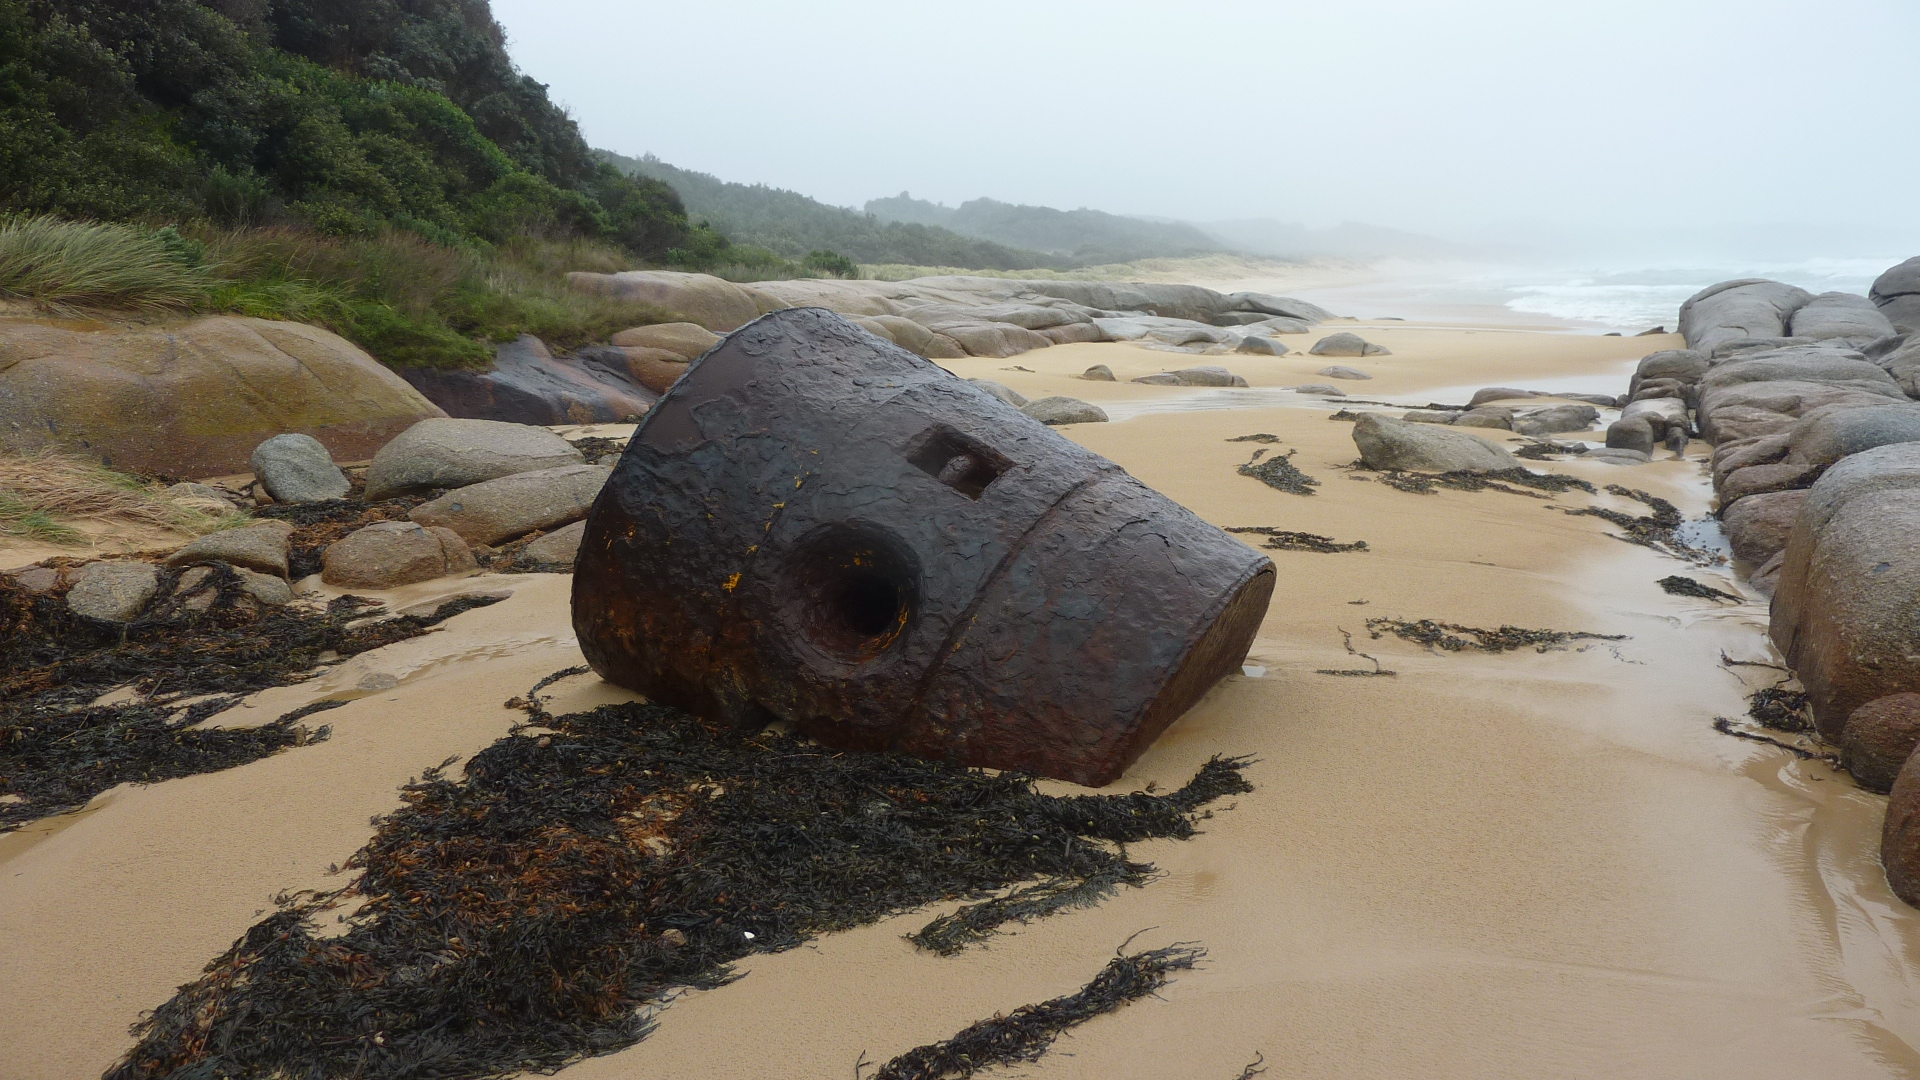 Image shows a cylindrical piece of wreckage on a beach  